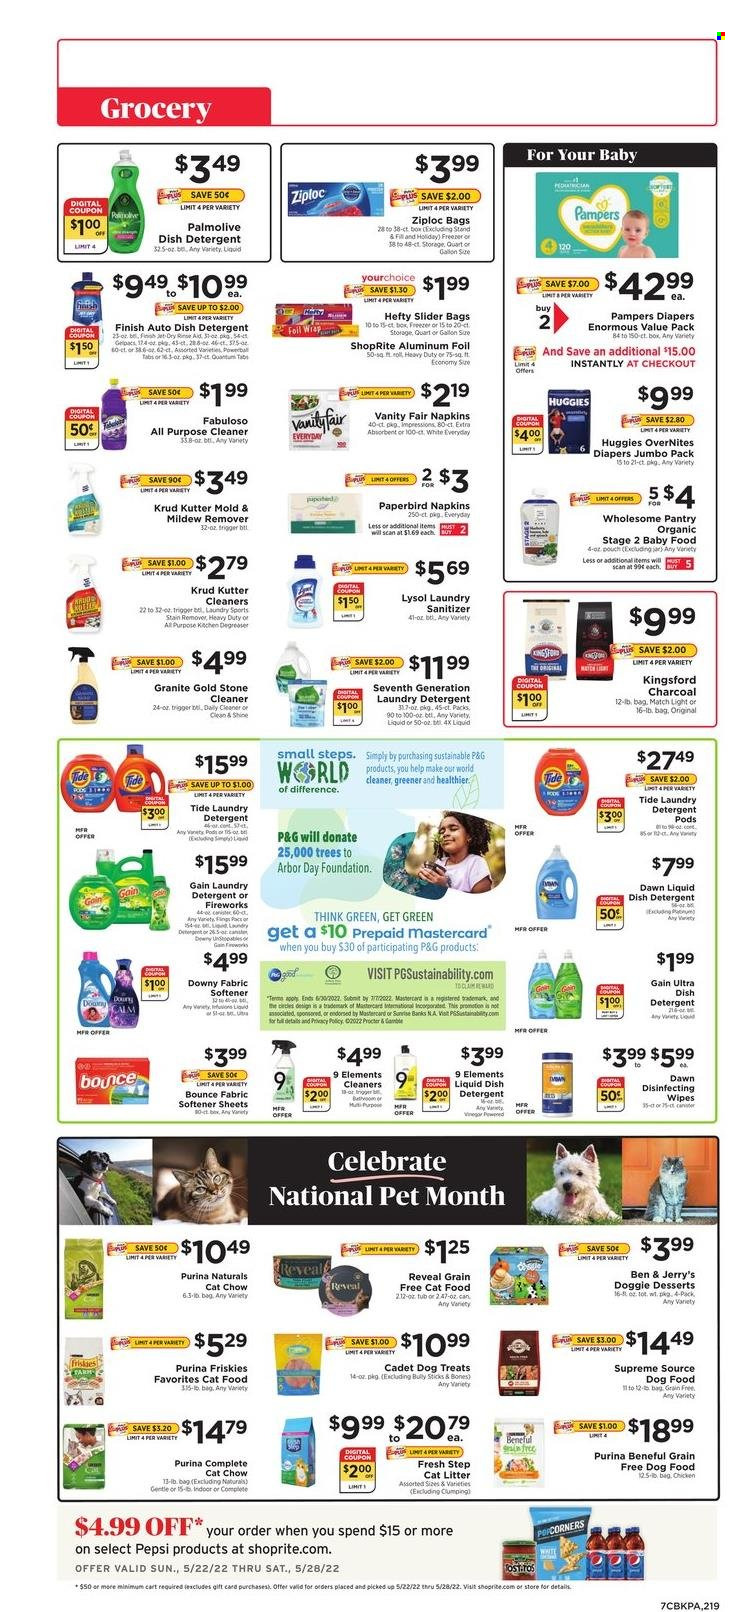 thumbnail - ShopRite Flyer - 05/22/2022 - 05/28/2022 - Sales products - Ben & Jerry's, popcorn, vinegar, Pepsi, wipes, Huggies, Pampers, napkins, nappies, detergent, Gain, cleaner, all purpose cleaner, stain remover, Lysol, Fabuloso, Tide, fabric softener, laundry detergent, Bounce, Downy Laundry, Palmolive, Ziploc, Hefty, aluminium foil, animal food, cat litter, cat food, dog food, Purina, Friskies, Fresh Step. Page 7.